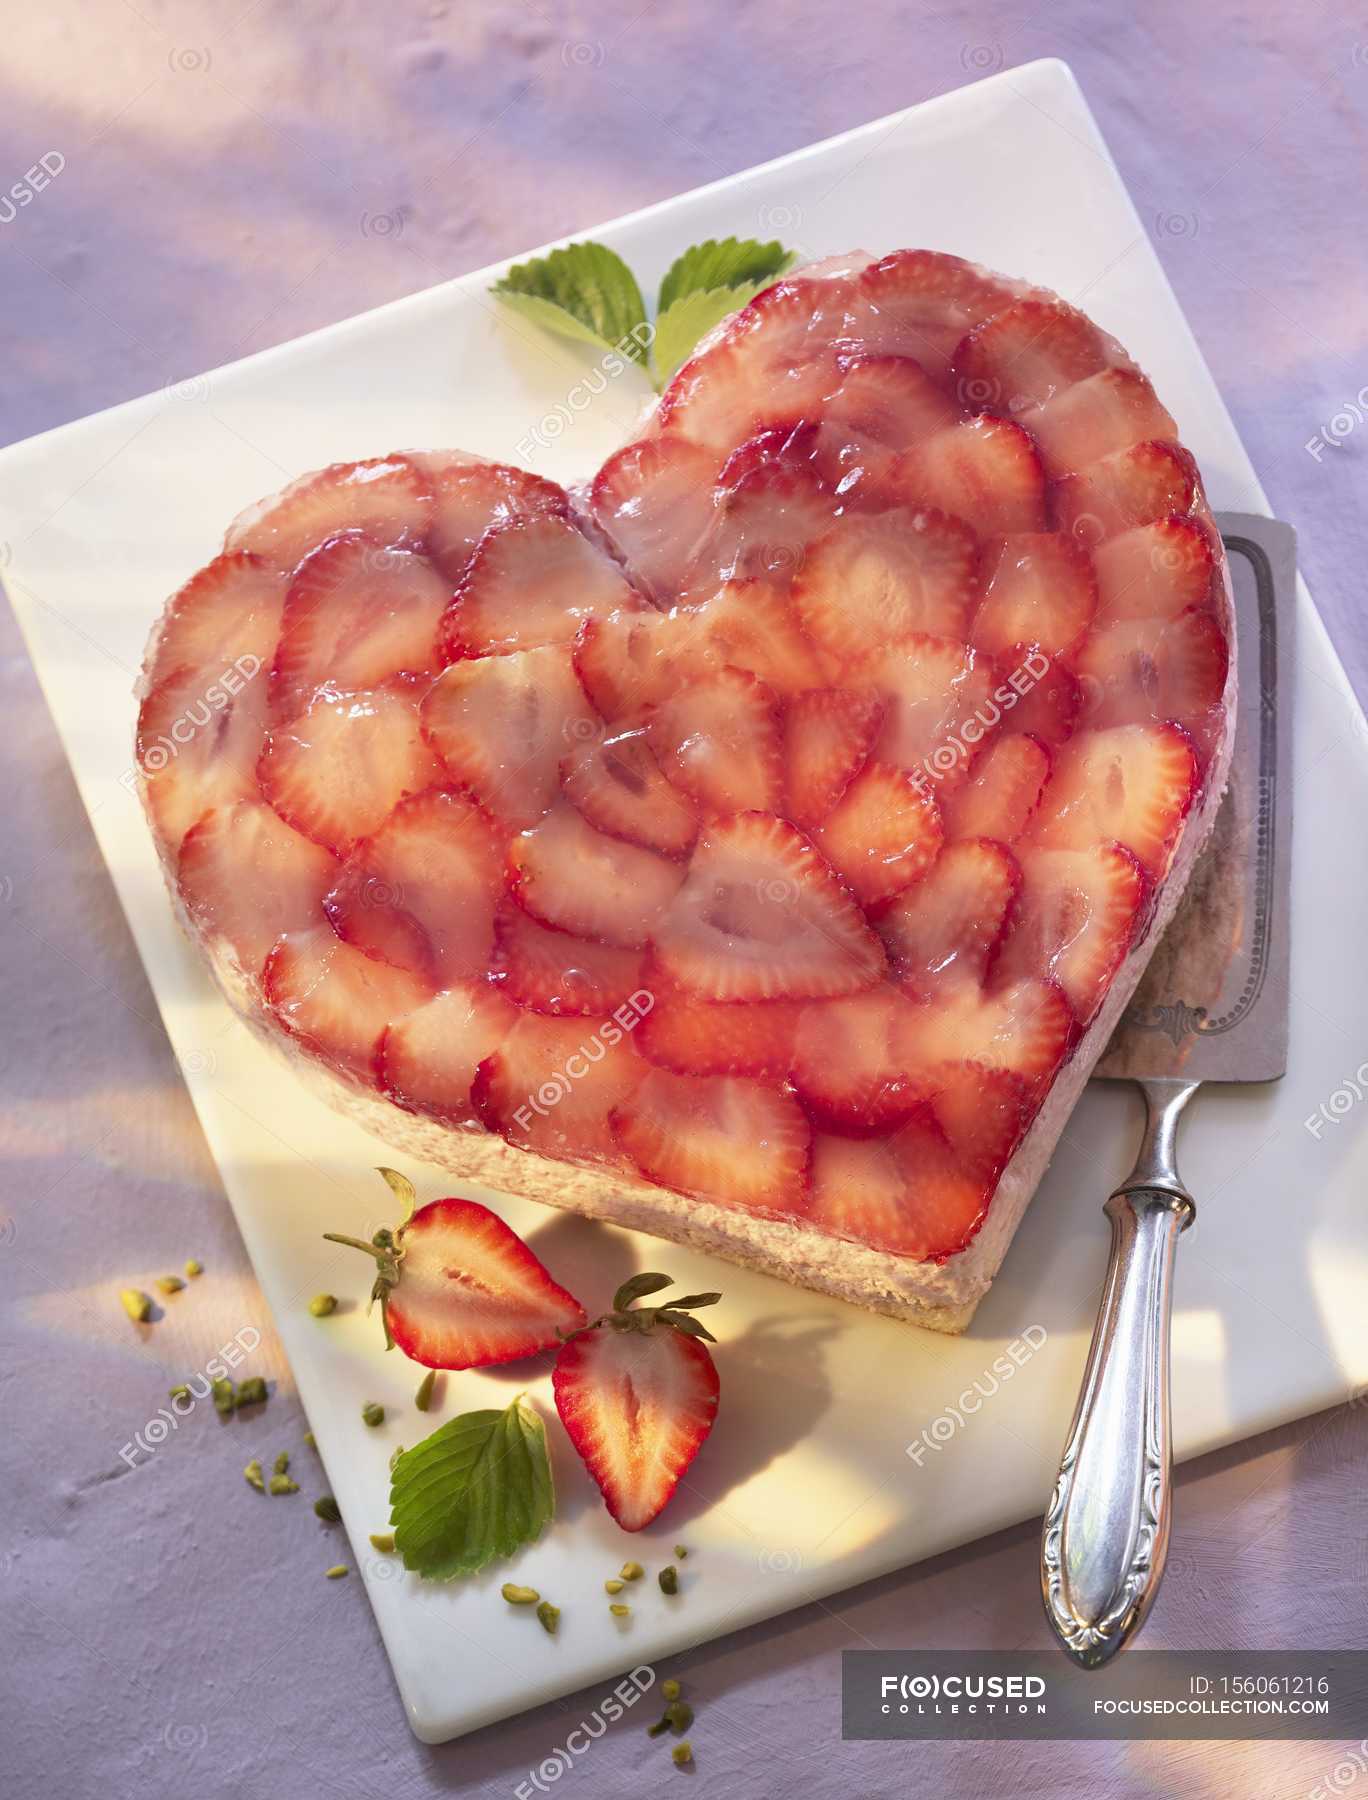 Heart-shaped strawberry cake — calories, delicious - Stock Photo ...